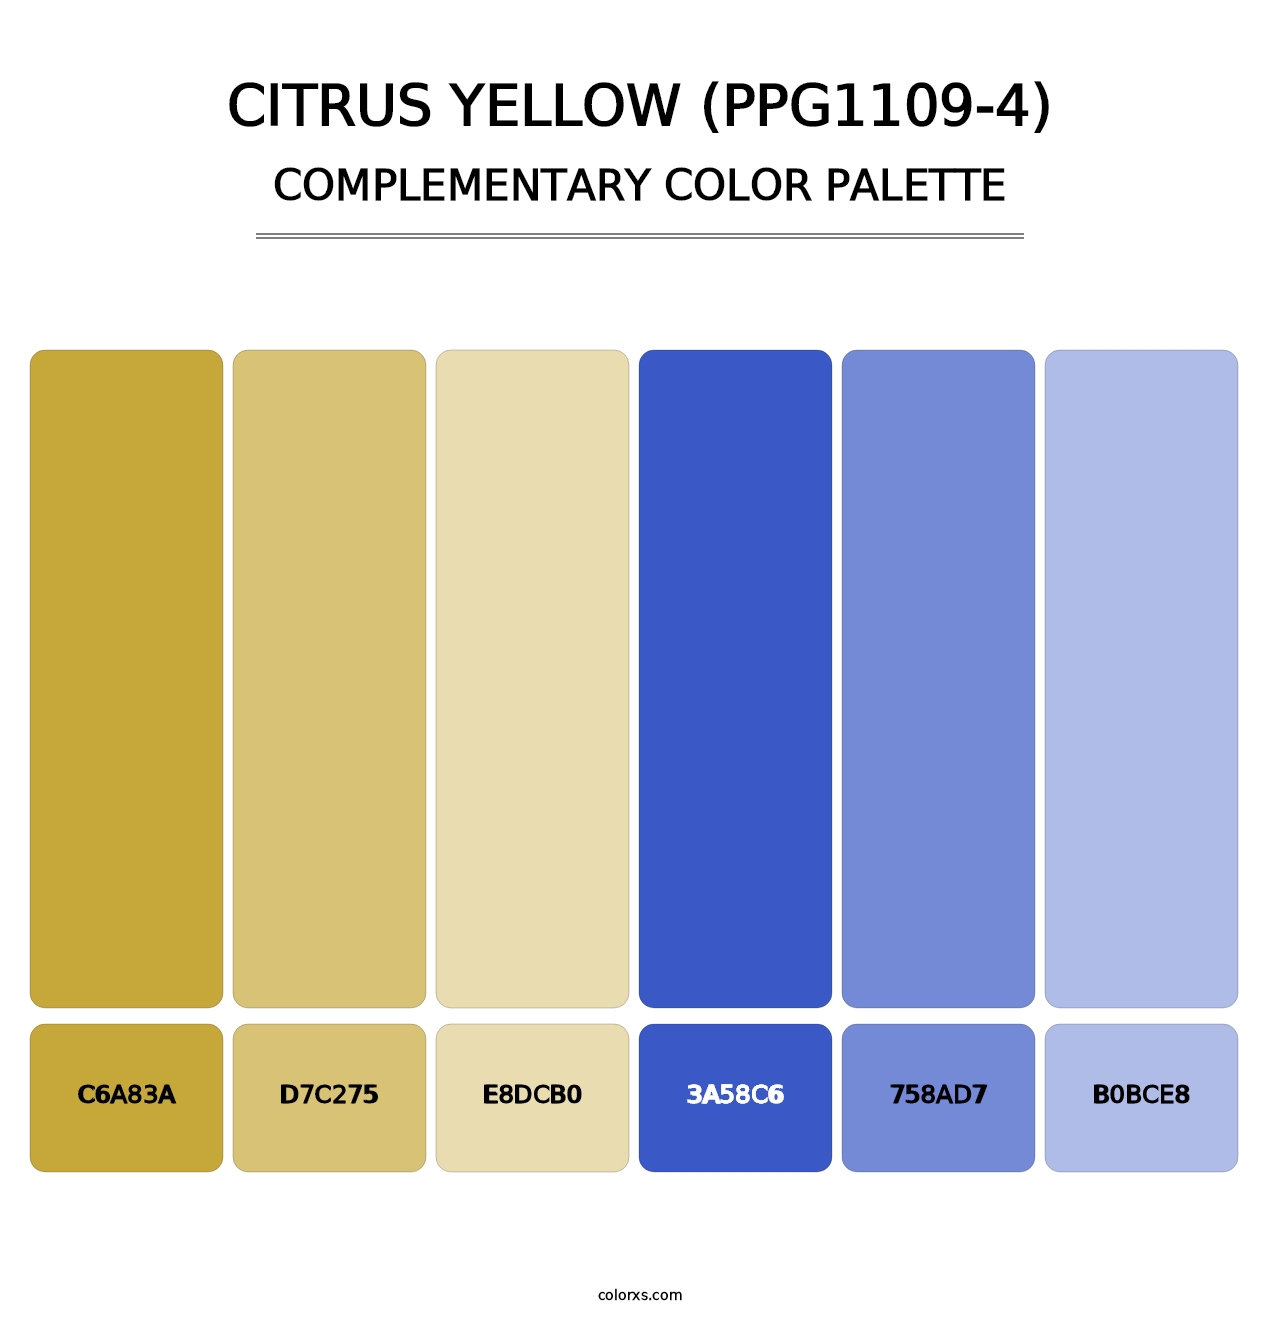 Citrus Yellow (PPG1109-4) - Complementary Color Palette